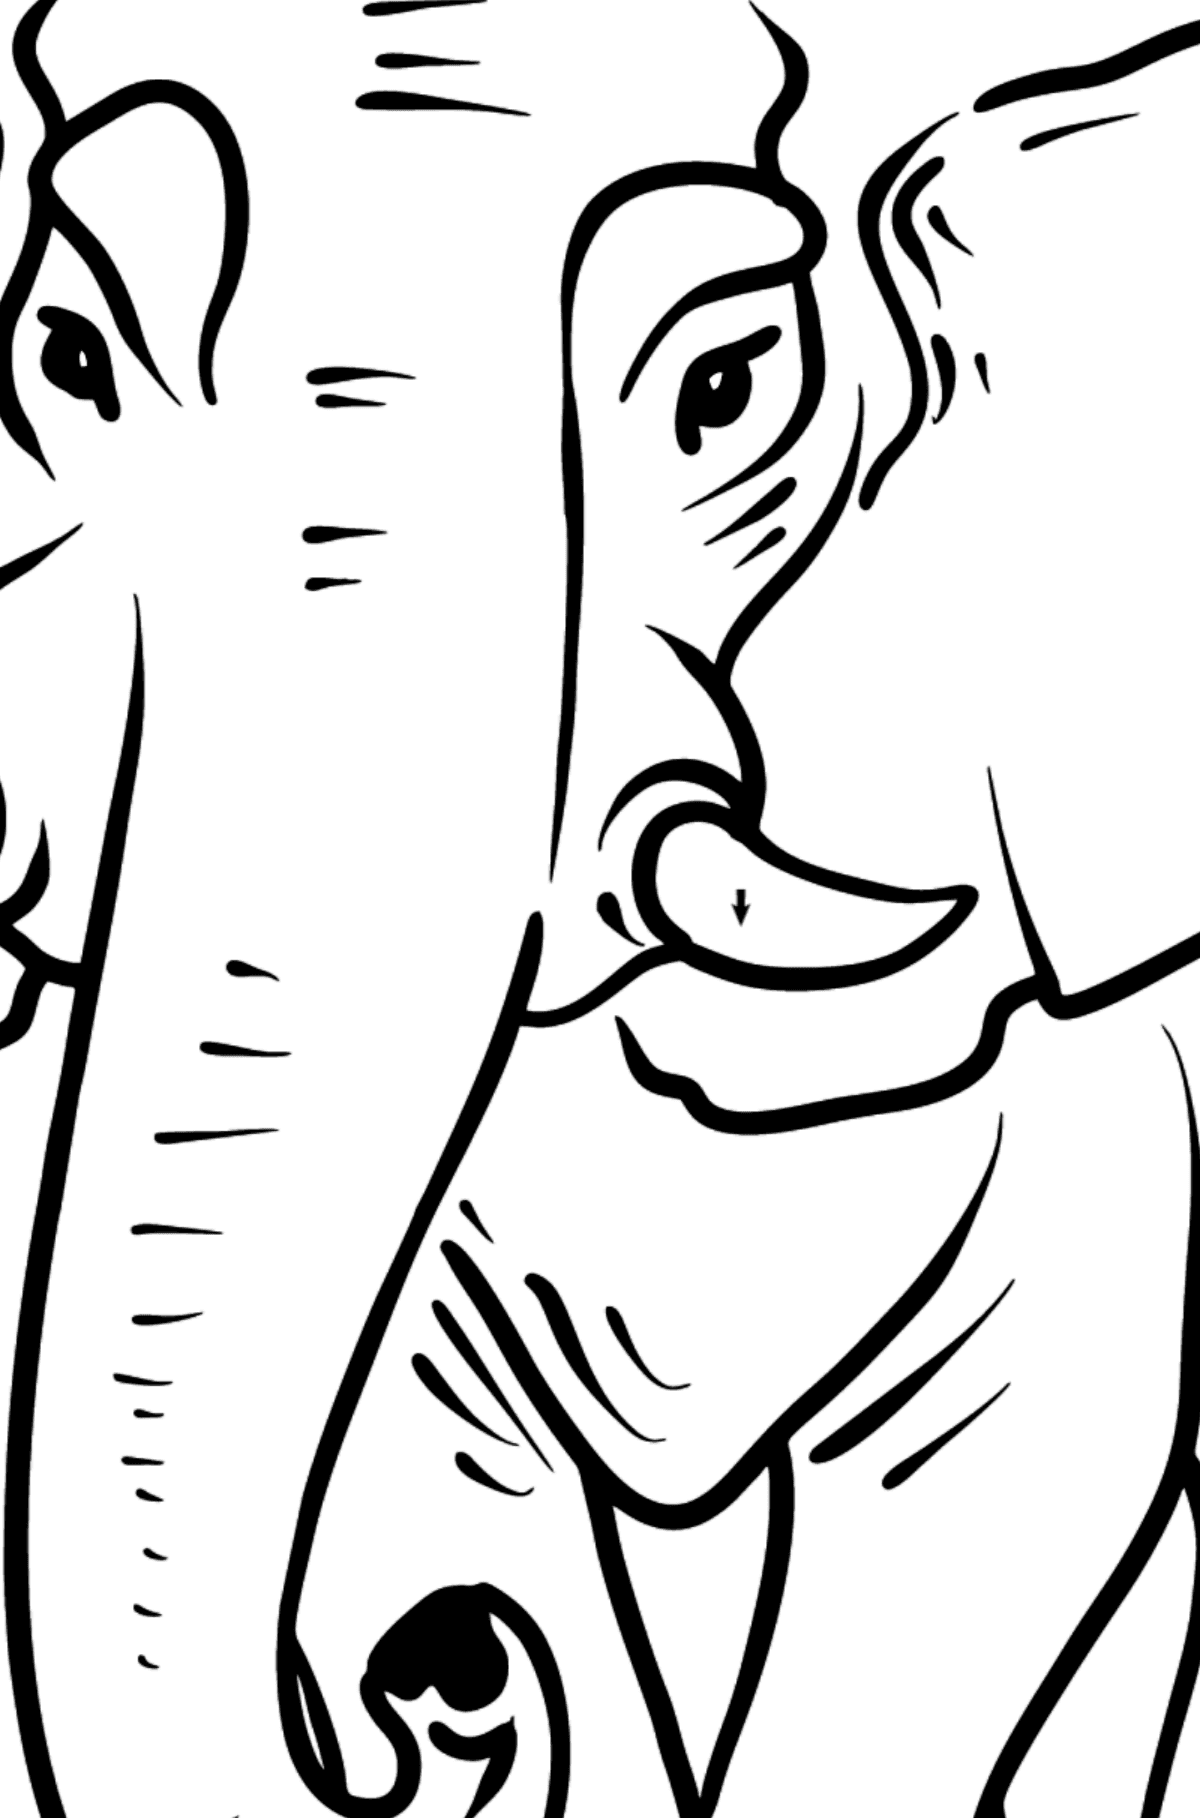 Elephant coloring page - Coloring by Symbols for Kids